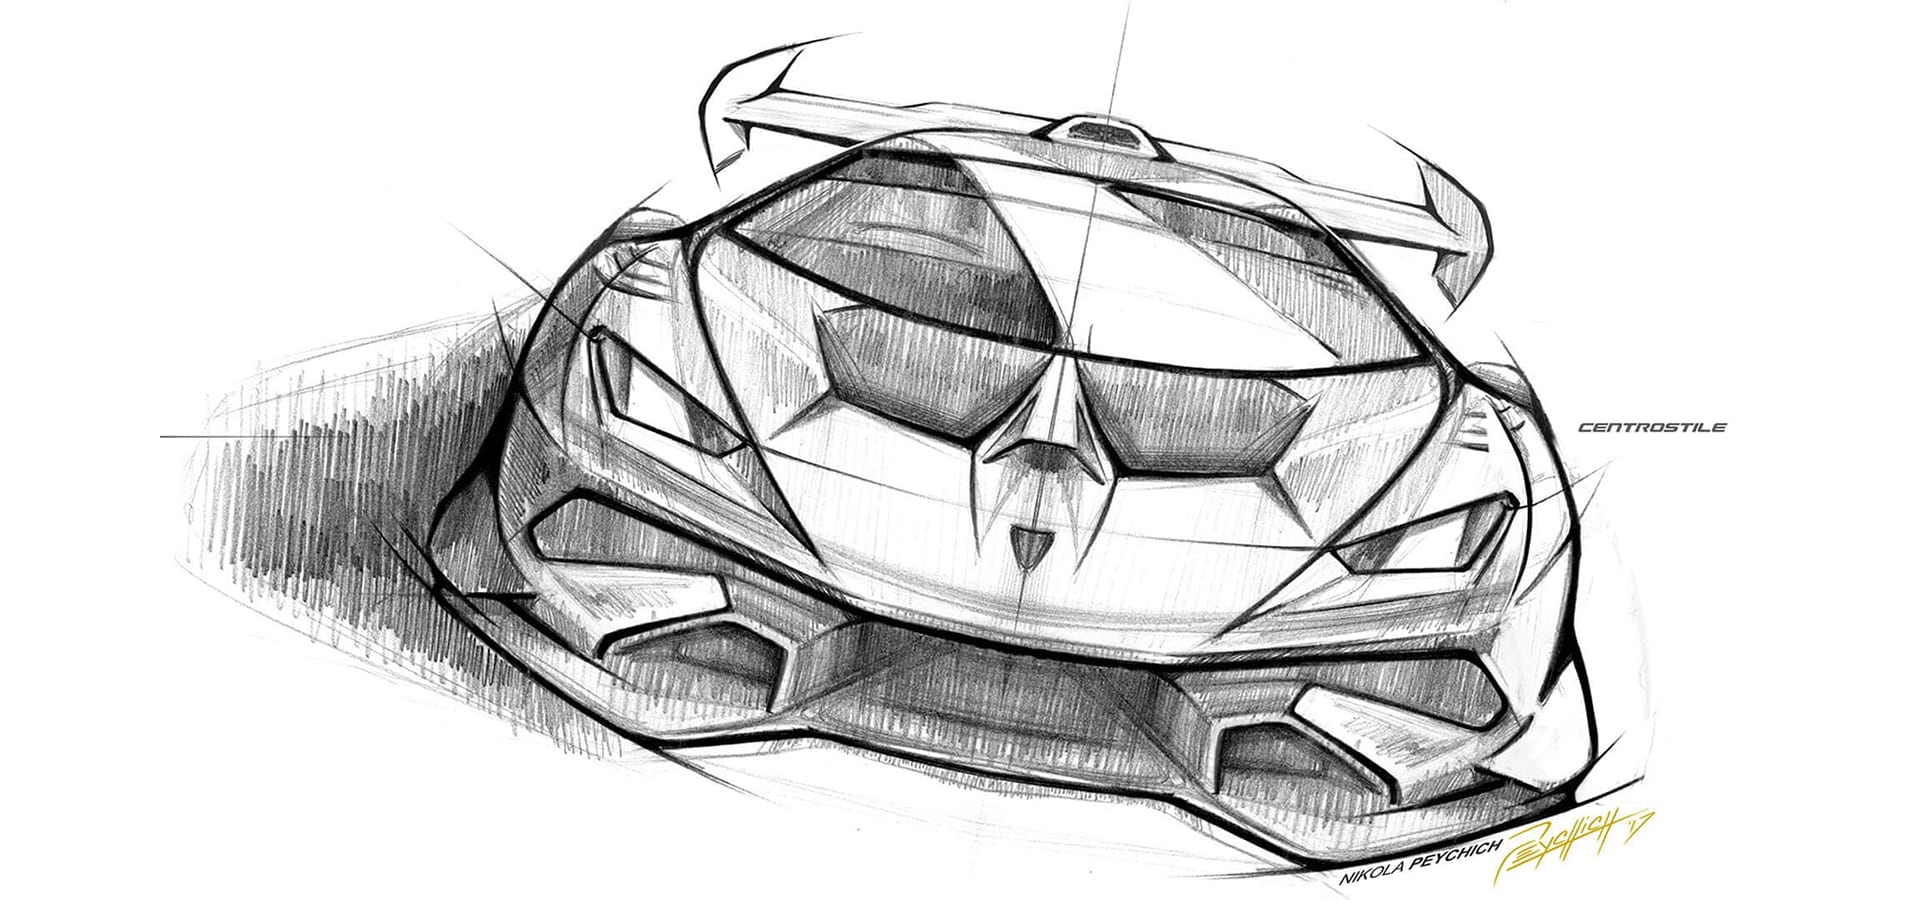 How to draw a car - Lamborghini Reventon - Step by step - YouTube